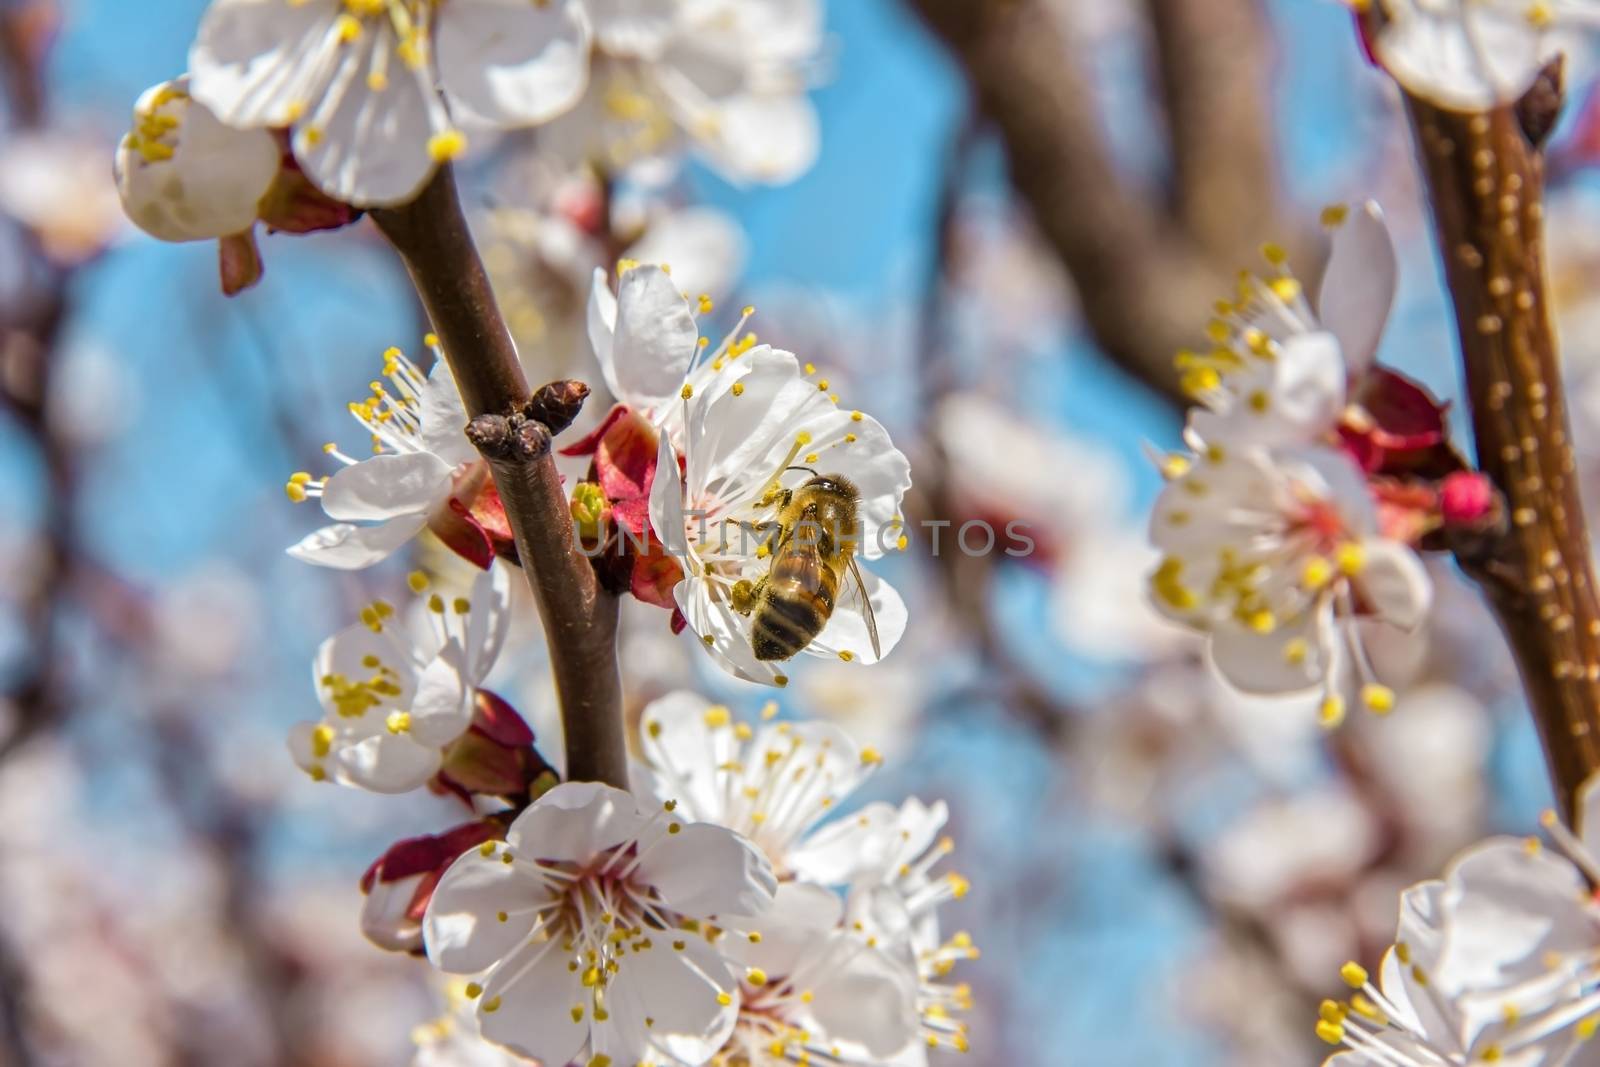 Bees pollinate young tree flowers in the garden, bee collects pollen with fruit trees, beautiful nature spring flowering trees pollination, pollen gathering, bee-keeping and honey